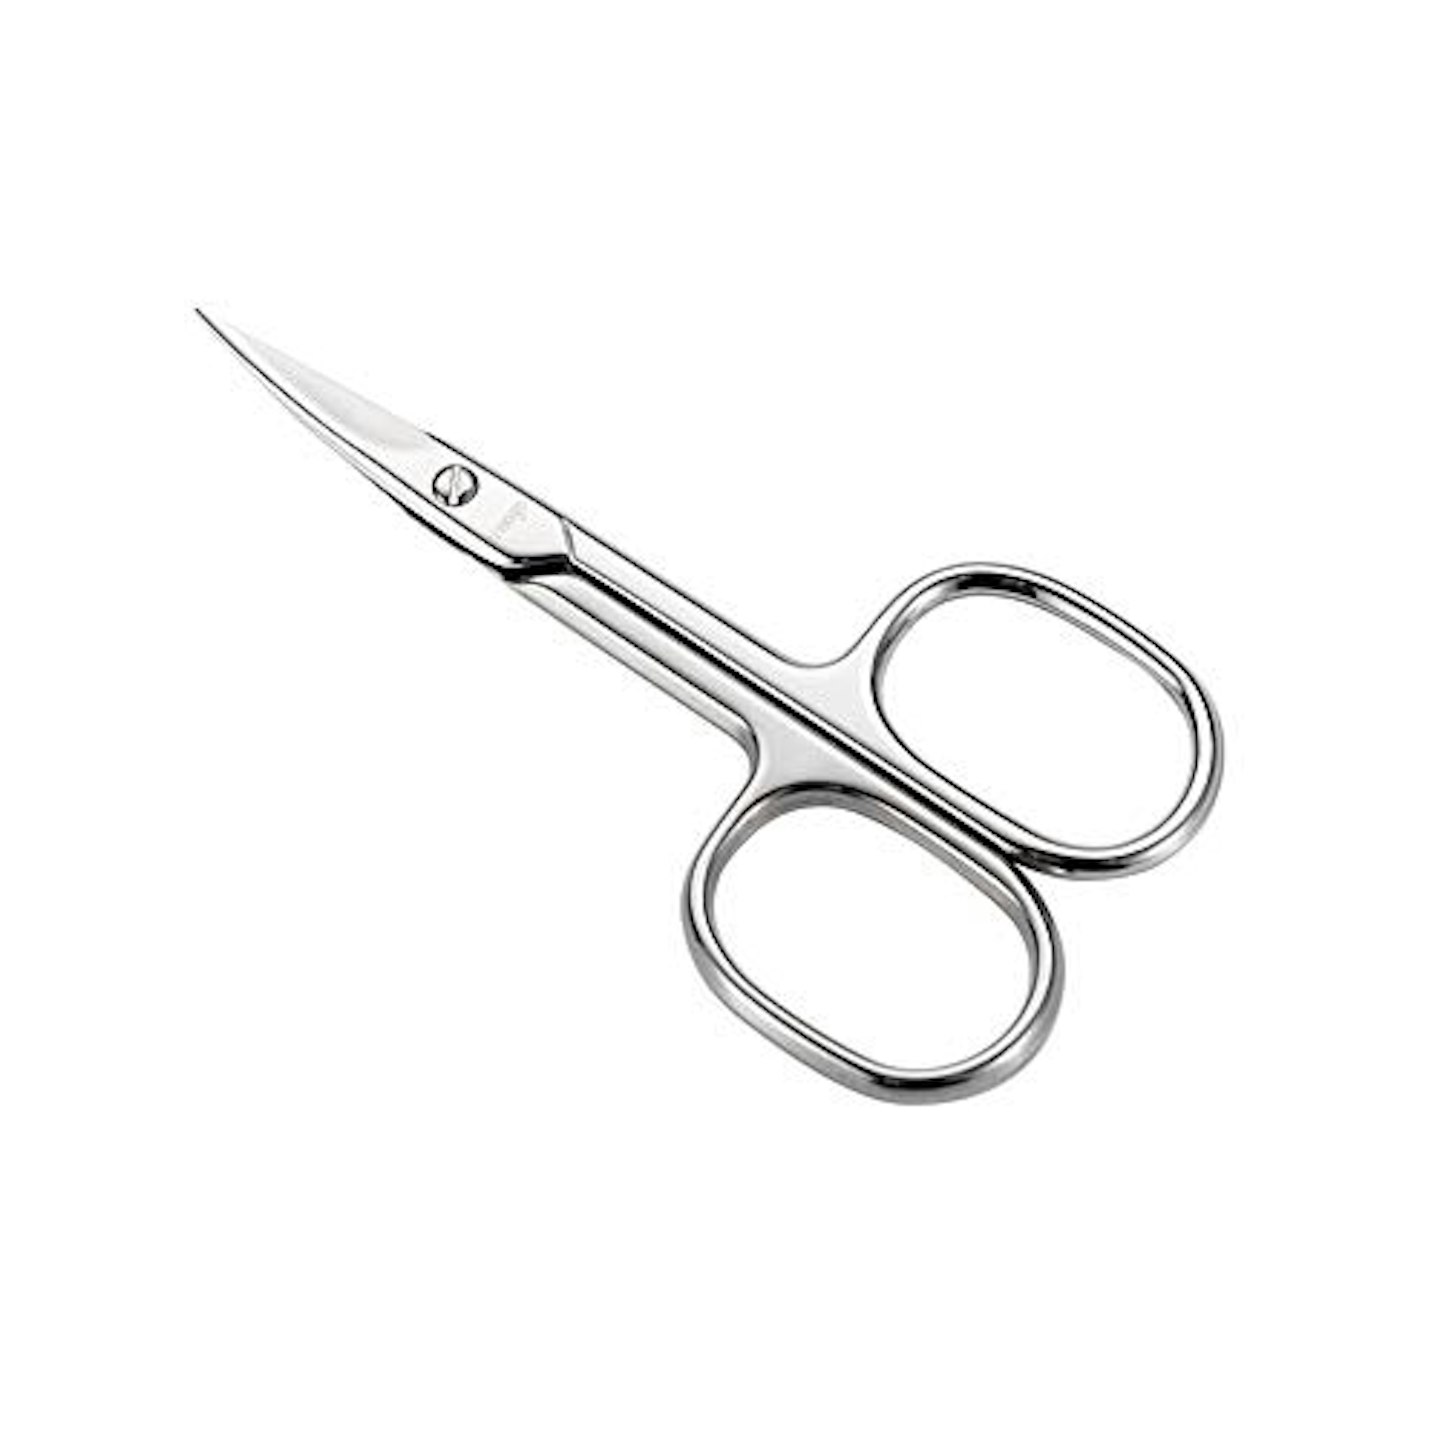 The best nail scissors for keeping your nails neat and tidy